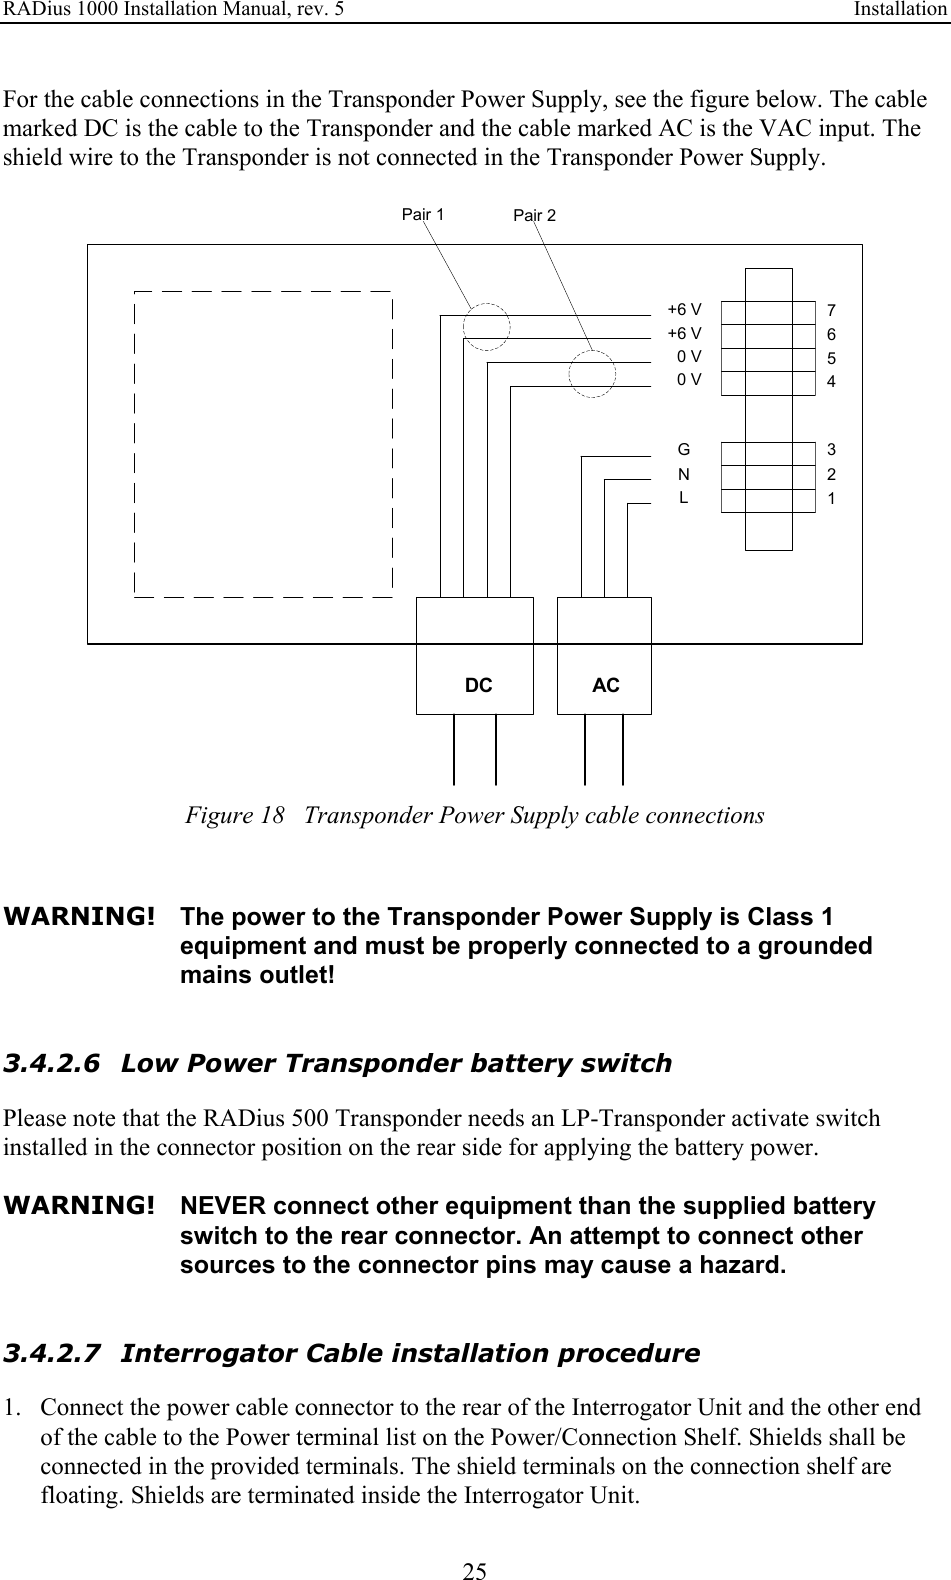 RADius 1000 Installation Manual, rev. 5    Installation 25 For the cable connections in the Transponder Power Supply, see the figure below. The cable marked DC is the cable to the Transponder and the cable marked AC is the VAC input. The shield wire to the Transponder is not connected in the Transponder Power Supply.  GNL+6 V+6 V  0 V  0 V7654321DC ACPair 1 Pair 2 Figure 18   Transponder Power Supply cable connections   WARNING! The power to the Transponder Power Supply is Class 1 equipment and must be properly connected to a grounded mains outlet!   3.4.2.6 Low Power Transponder battery switch Please note that the RADius 500 Transponder needs an LP-Transponder activate switch installed in the connector position on the rear side for applying the battery power.  WARNING!  NEVER connect other equipment than the supplied battery switch to the rear connector. An attempt to connect other sources to the connector pins may cause a hazard.   3.4.2.7 Interrogator Cable installation procedure 1. Connect the power cable connector to the rear of the Interrogator Unit and the other end of the cable to the Power terminal list on the Power/Connection Shelf. Shields shall be connected in the provided terminals. The shield terminals on the connection shelf are floating. Shields are terminated inside the Interrogator Unit. 